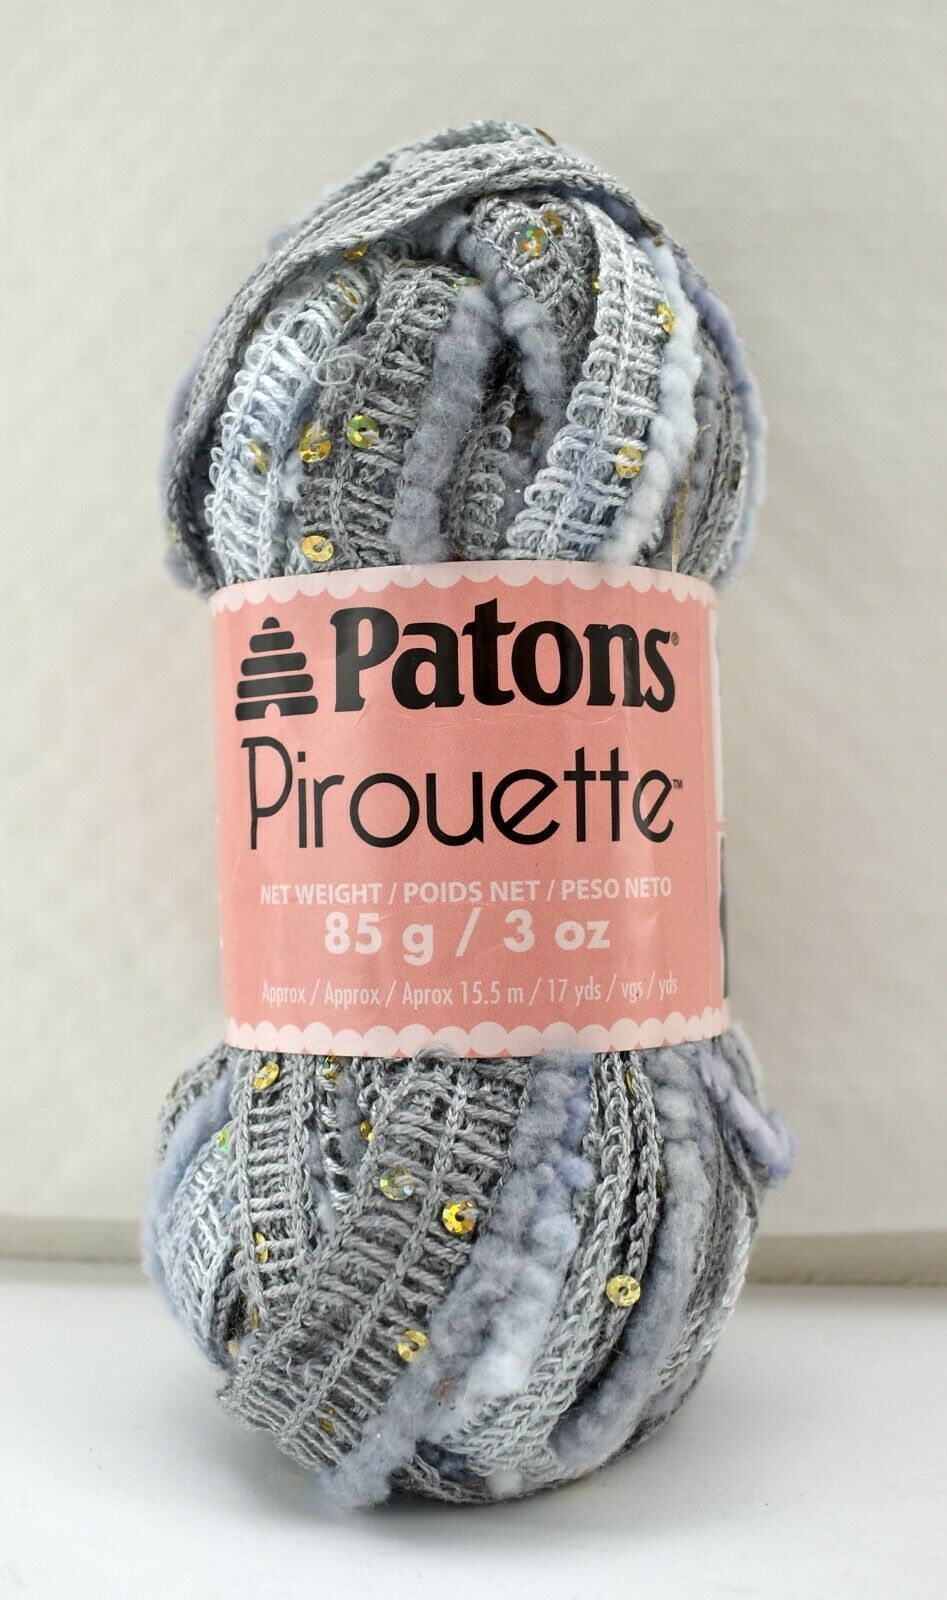 Primary image for Patons Pirouette Ruffle/Chenille Edge Yarn - 1 Skein Color Silver Sparkle #84046